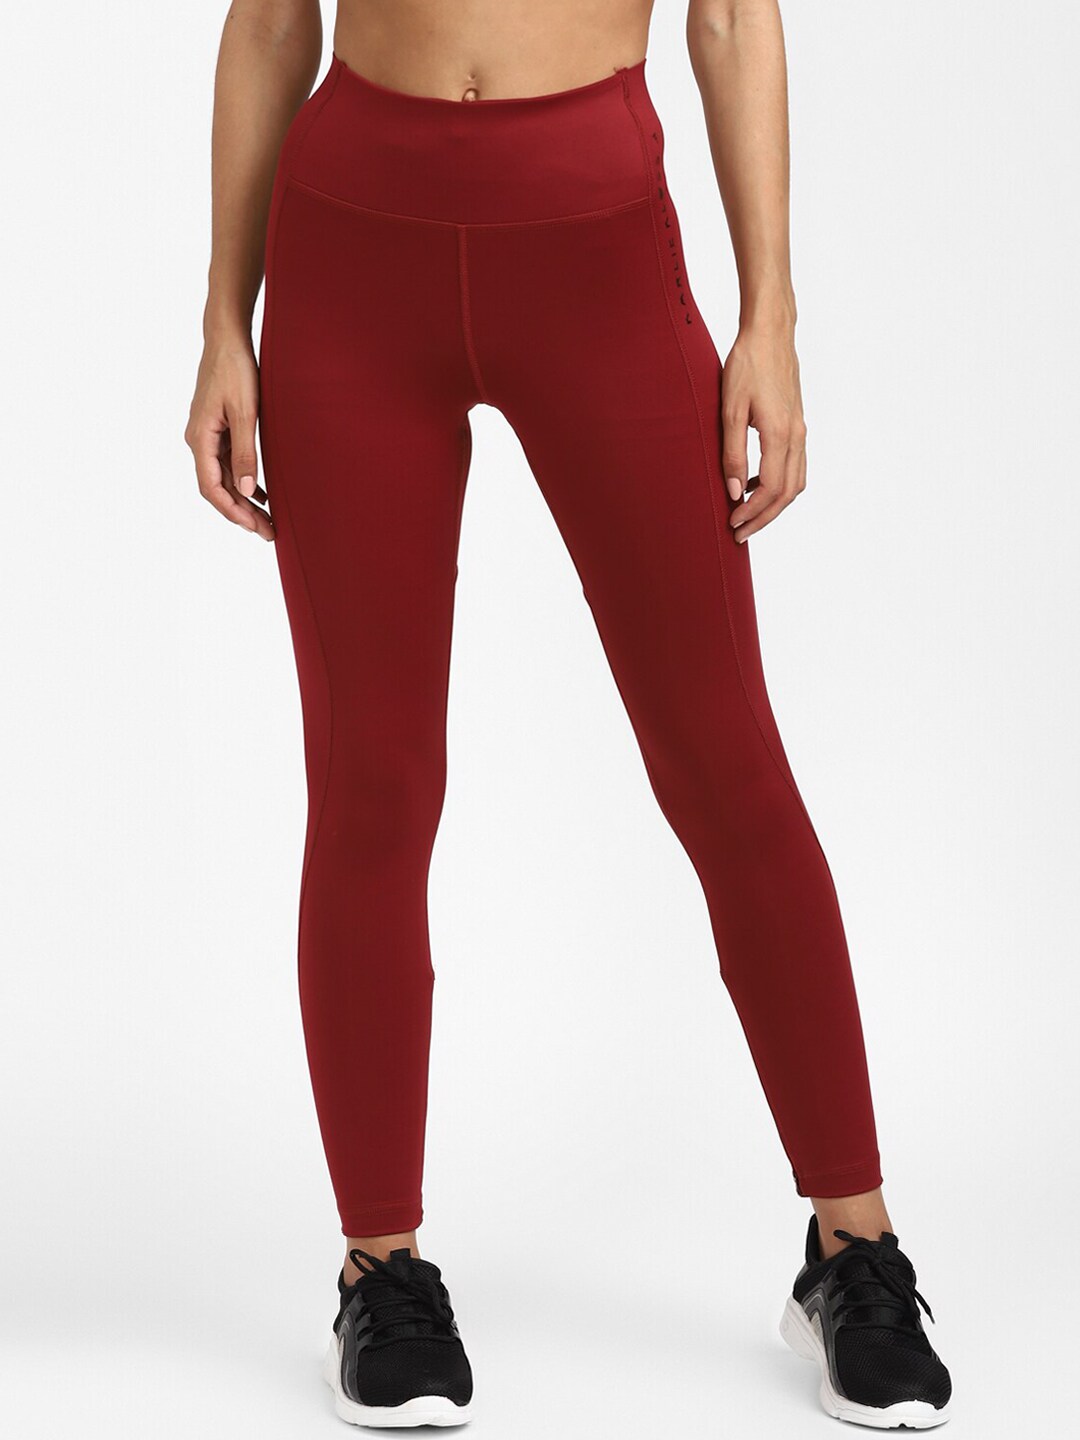 ADIDAS Women Maroon Solid Tights Price in India